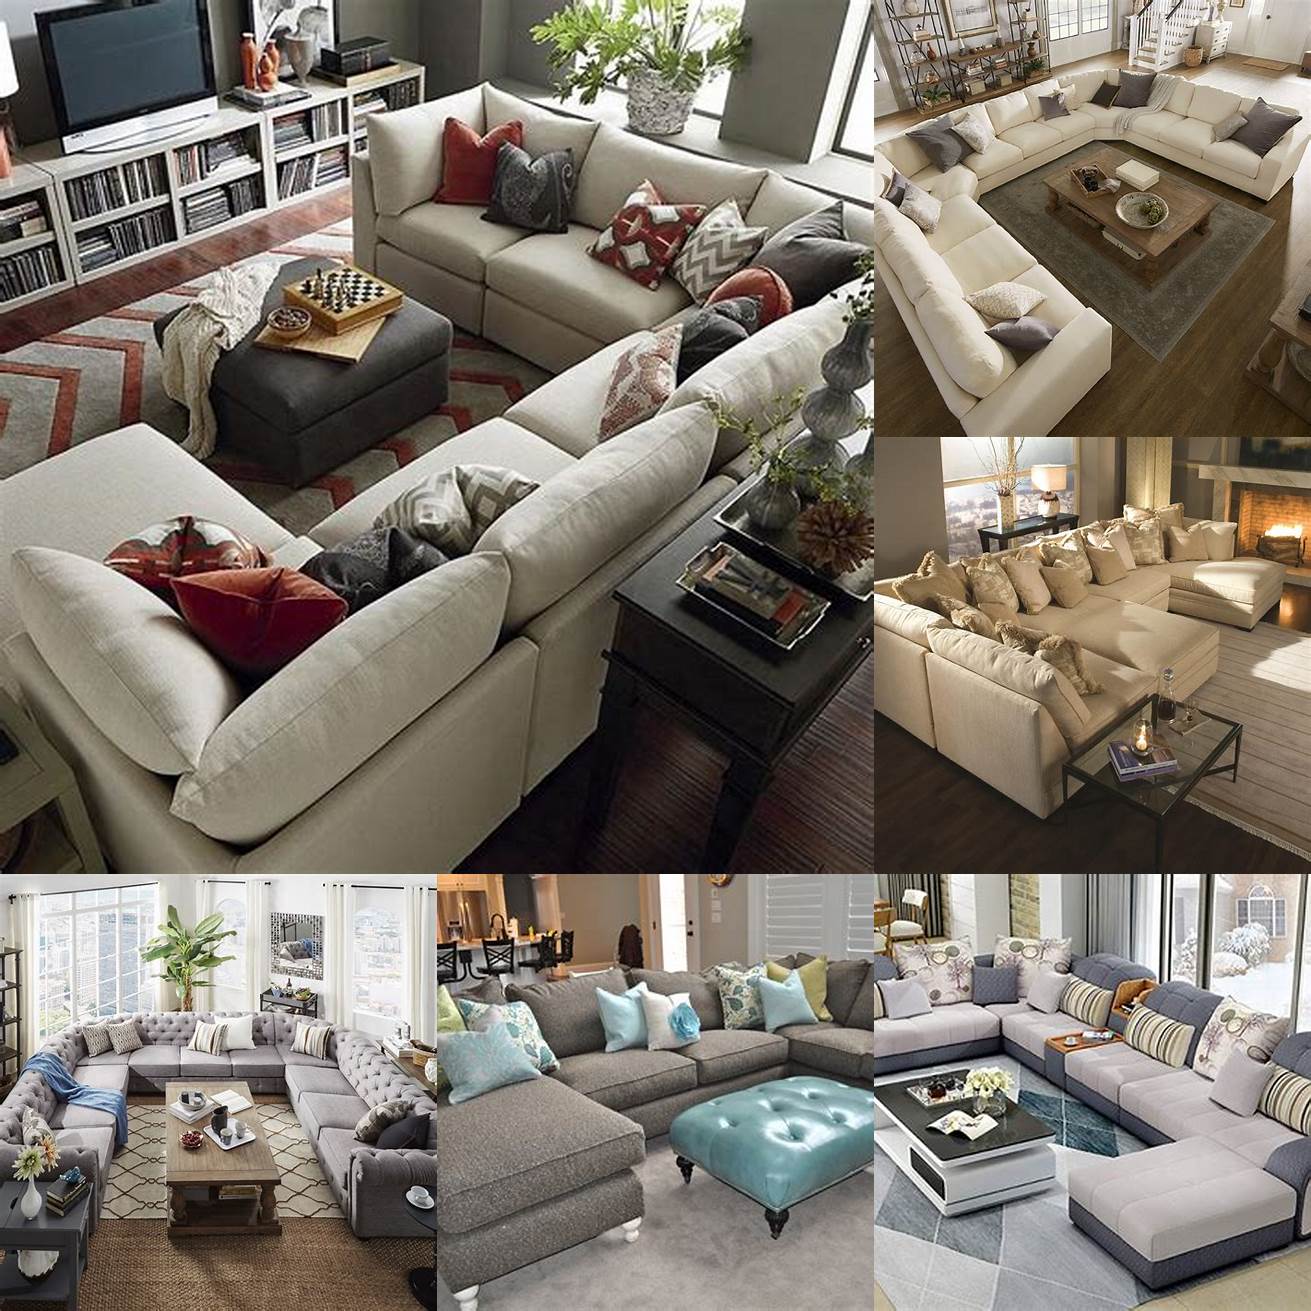 A neutral U shaped sectional sofa complements any living room decor